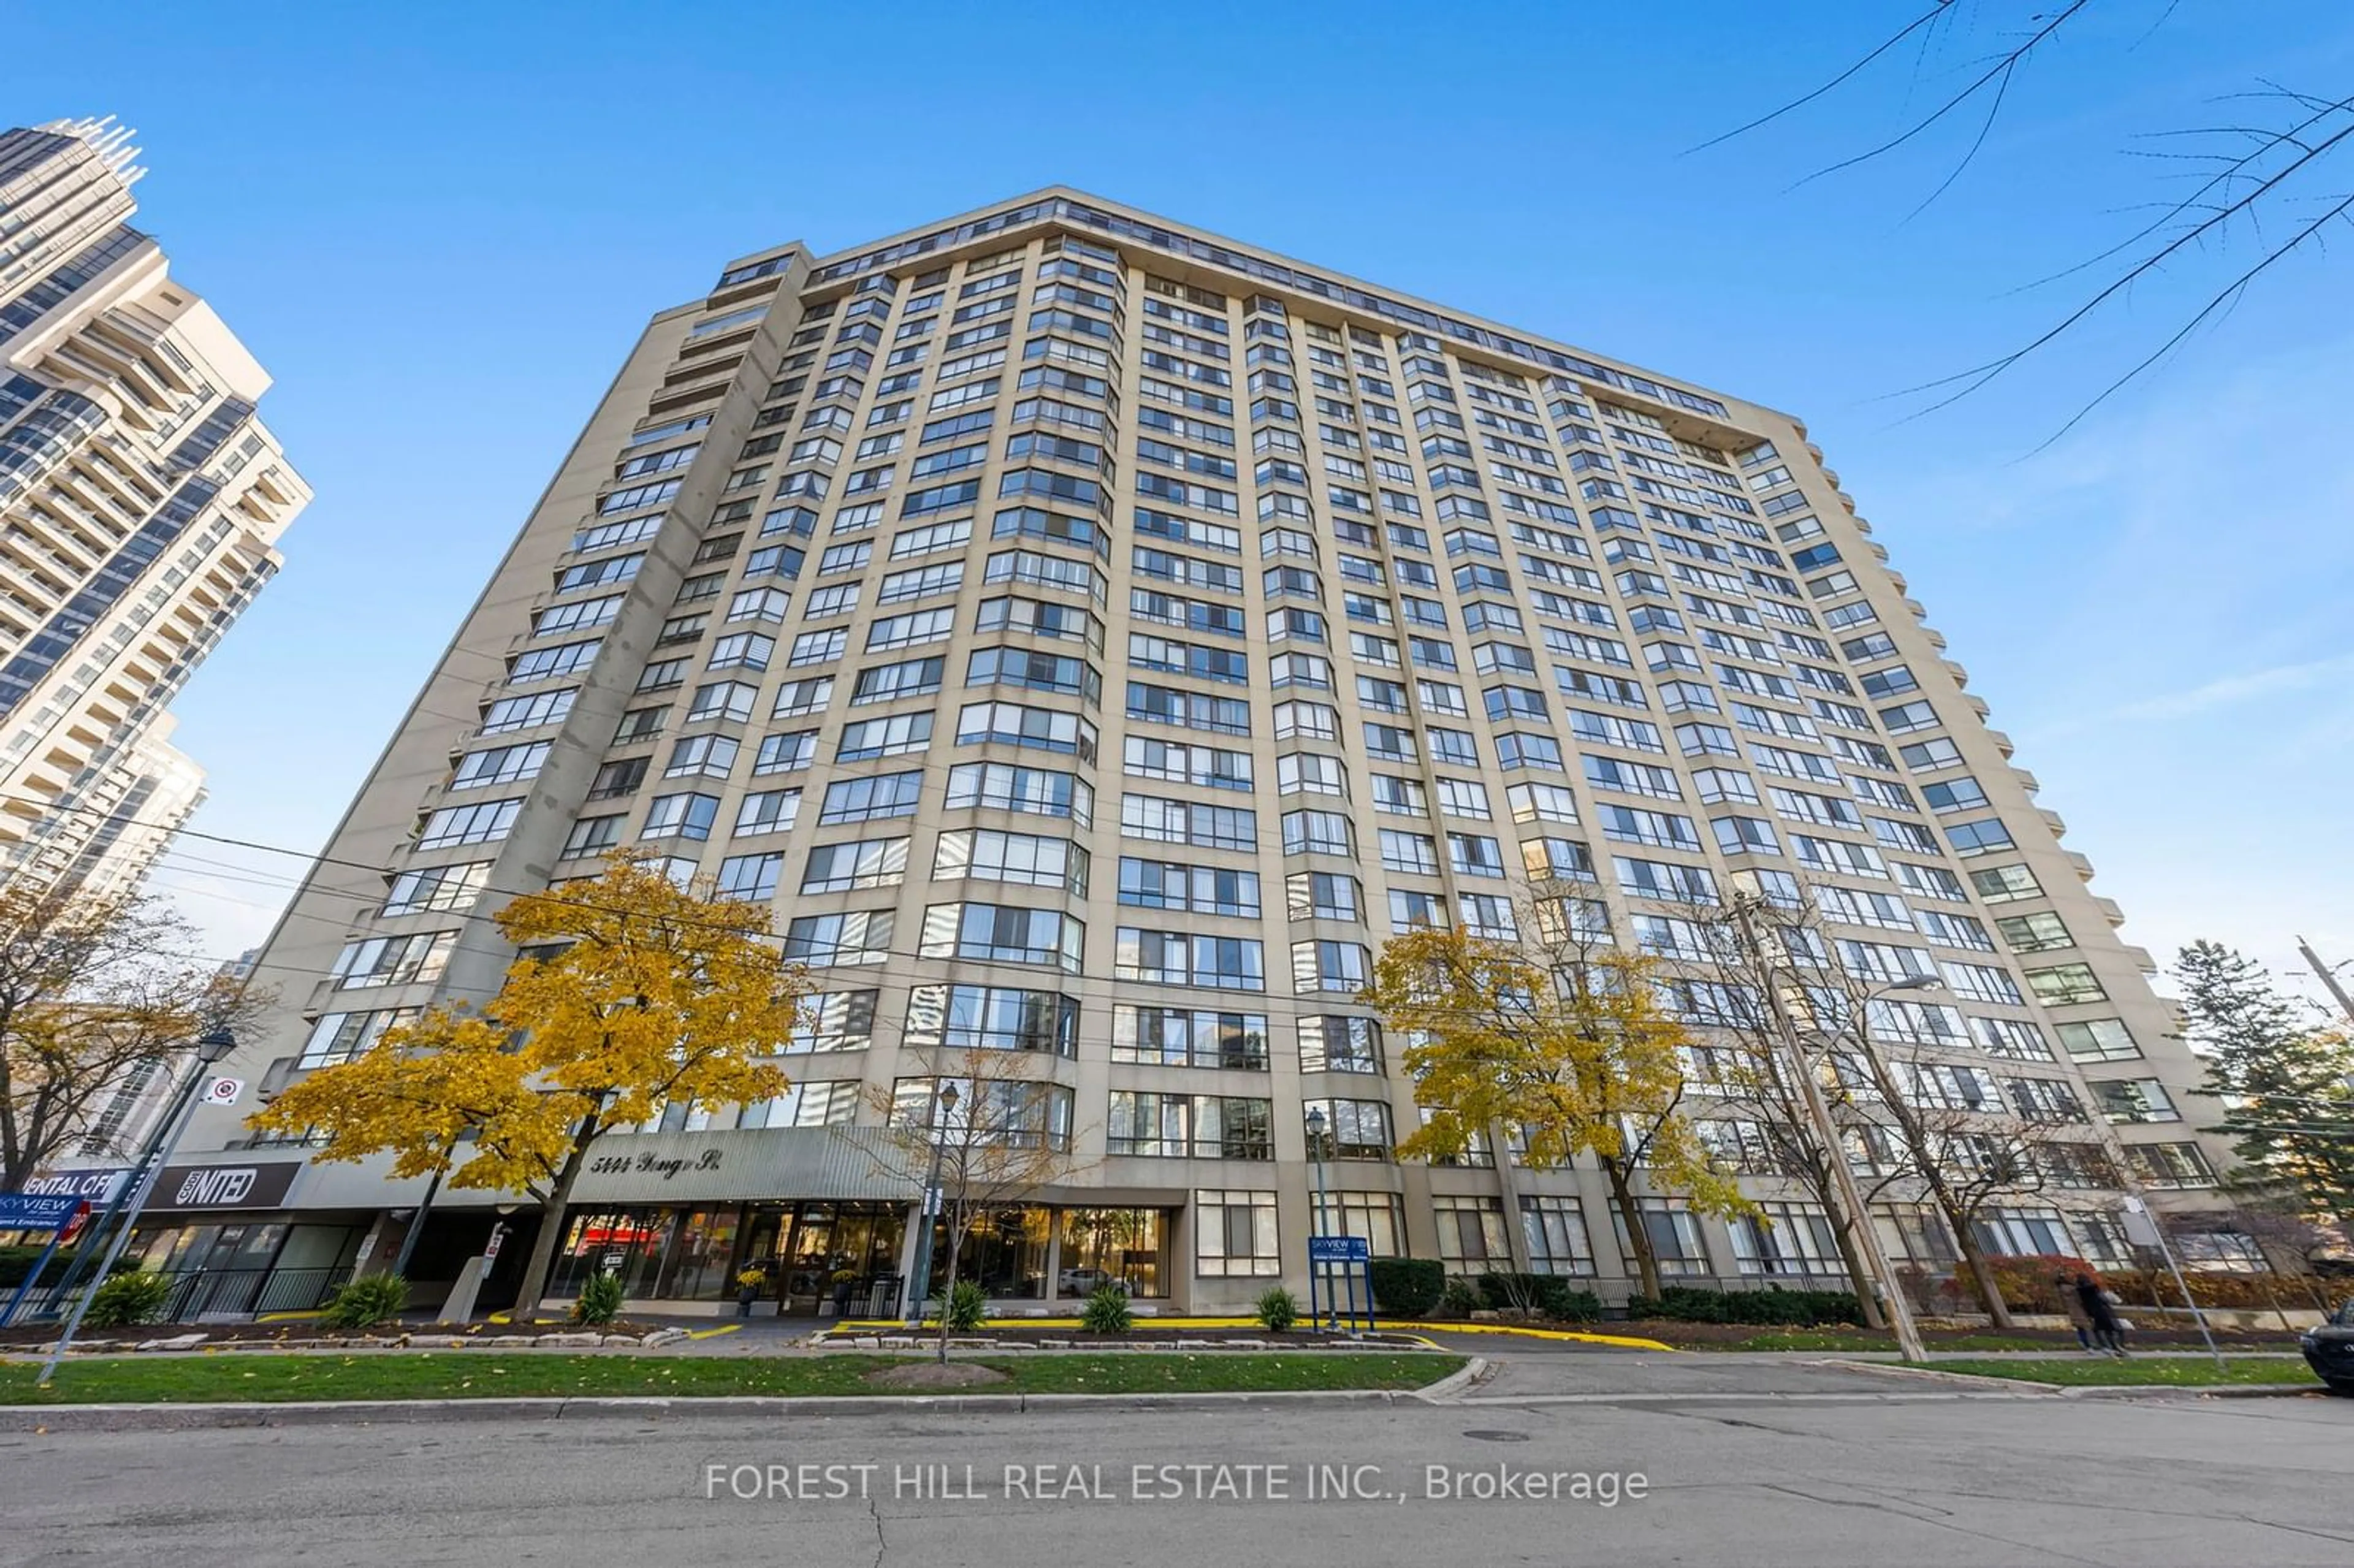 A pic from exterior of the house or condo for 5444 Yonge St #1607, Toronto Ontario M2N 6J4